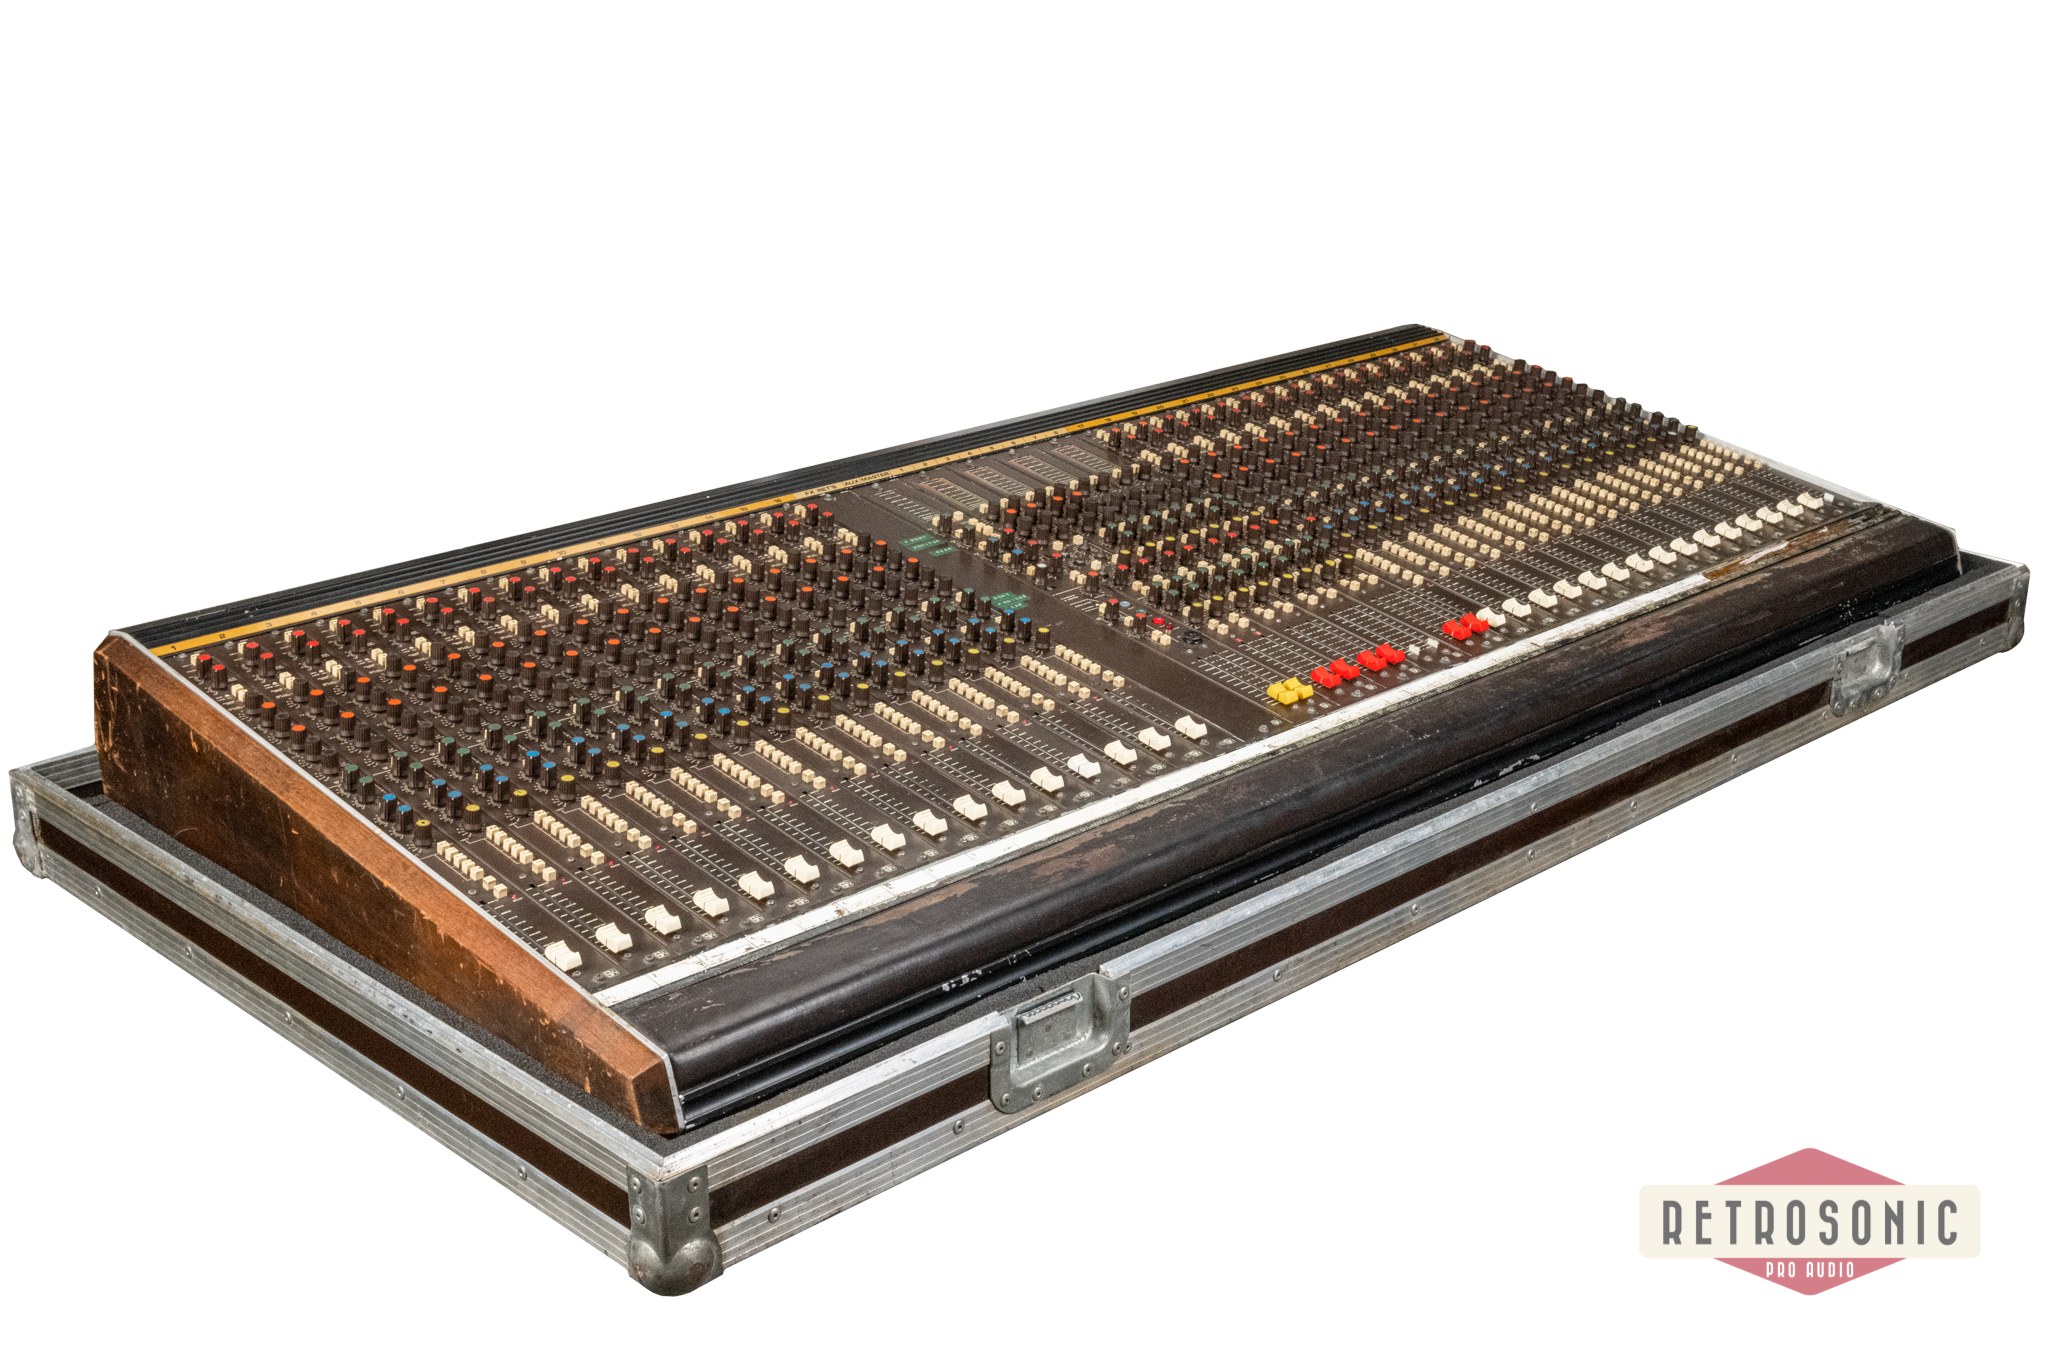 Soundcraft Series 800 32/8/2 Analog Mixing Console. Cased.